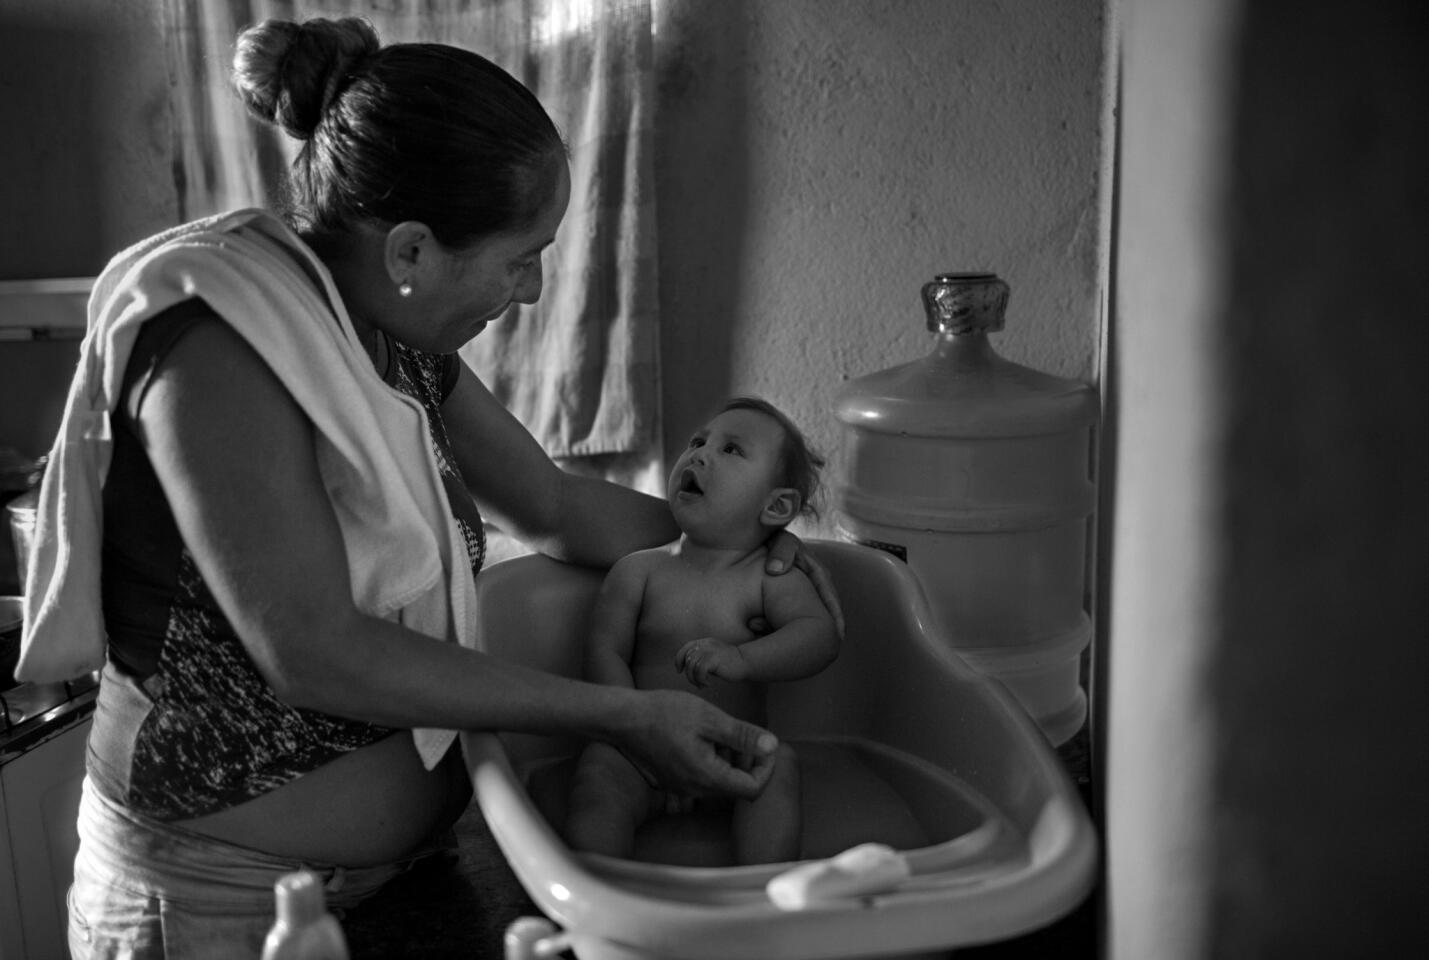 Gilberto is easily agitated and cries incessantly. A bath is often the only way to soothe him.